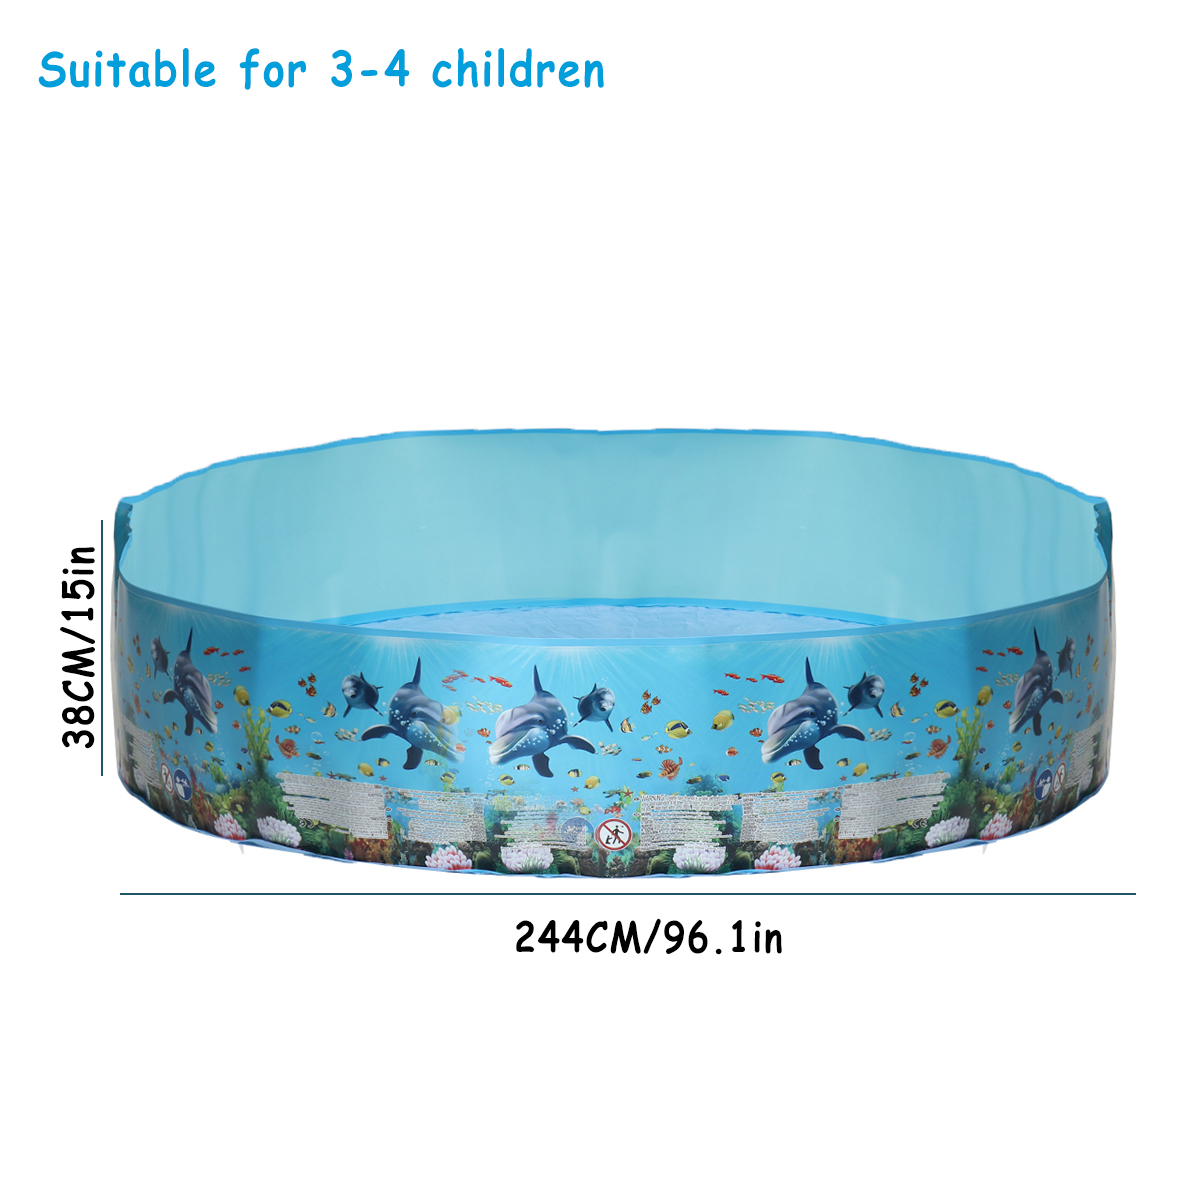 183244cm-Round-Swimming-Pool-Home-Use-Garden-Paddling-Pool-Non-inflatable-Children-Bathing-Tub-Kids--1715065-10